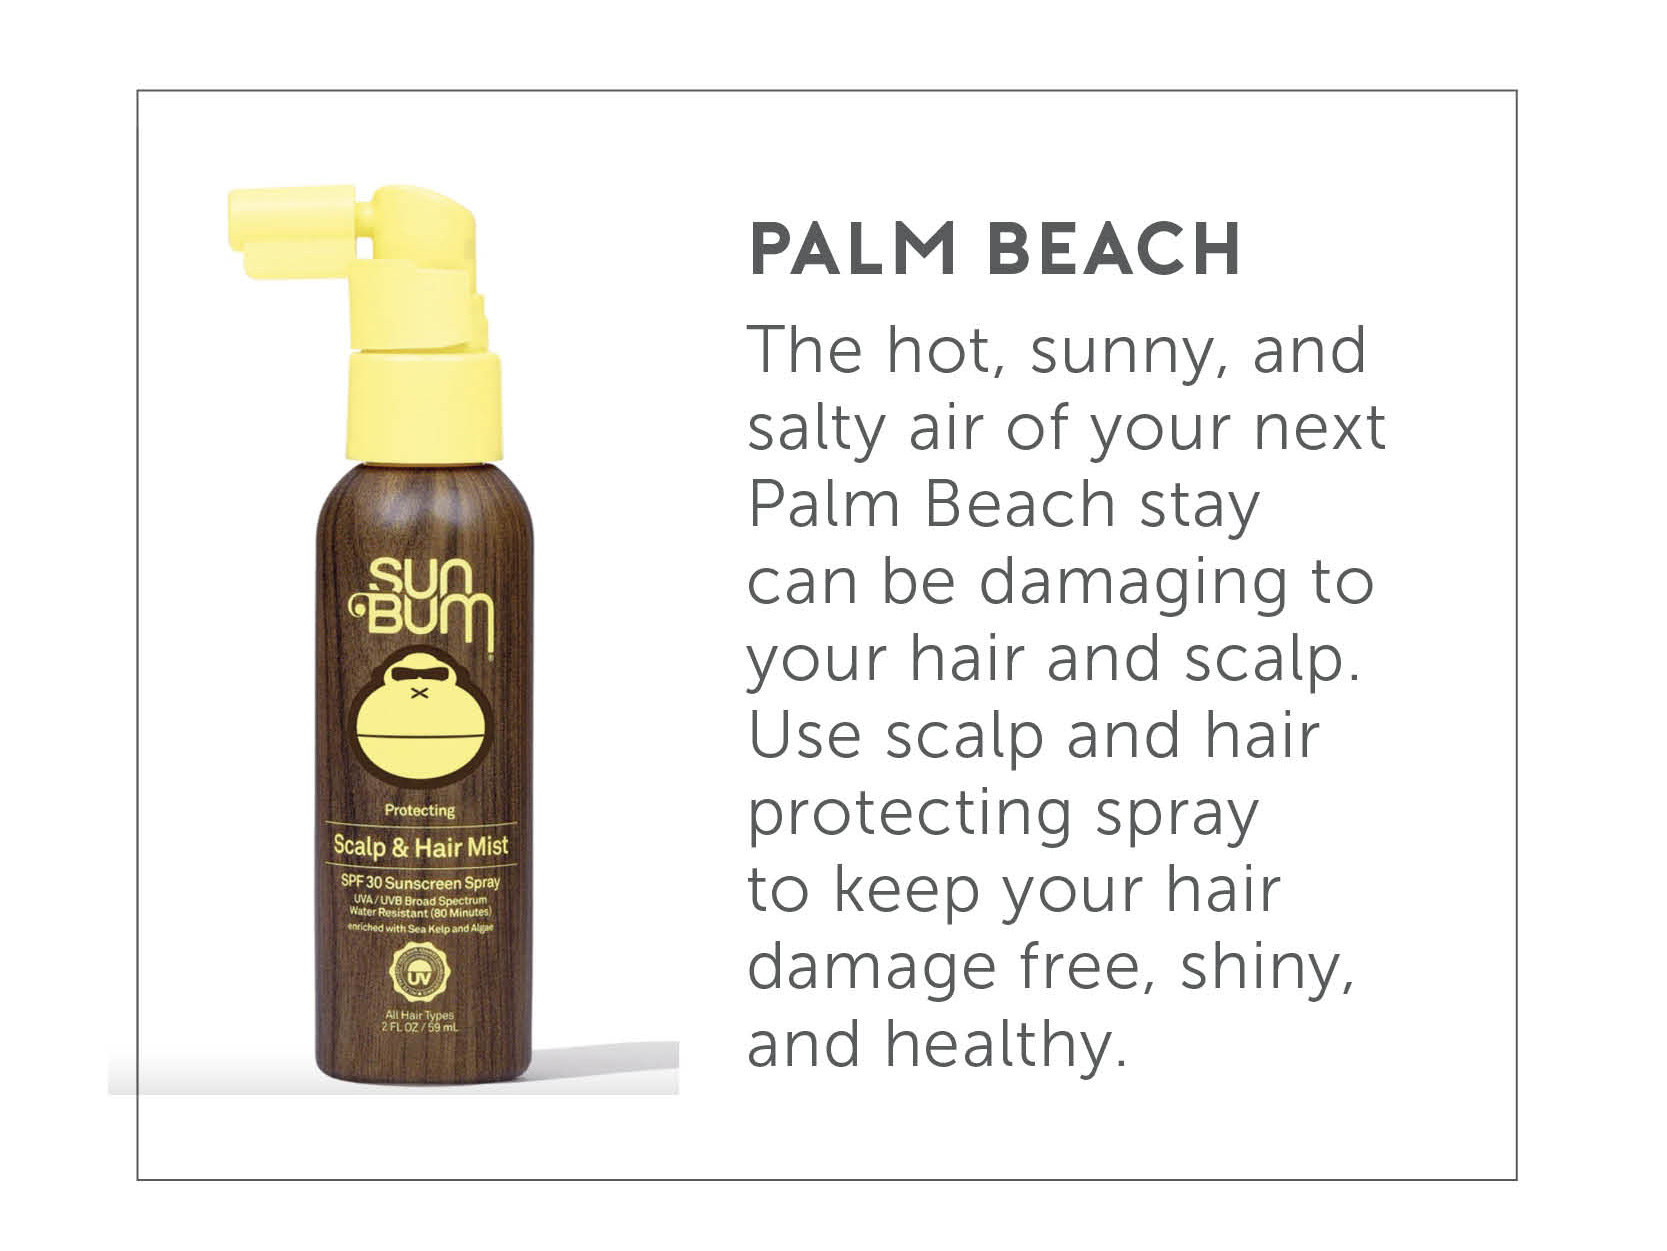 Palm Bean - The hot, sunny, and salty air of your next Pam Beach stay can be damaging to your hair and scalp. Use scale and hair protecting spray to keep your hair damage free, shiny, and healthy.